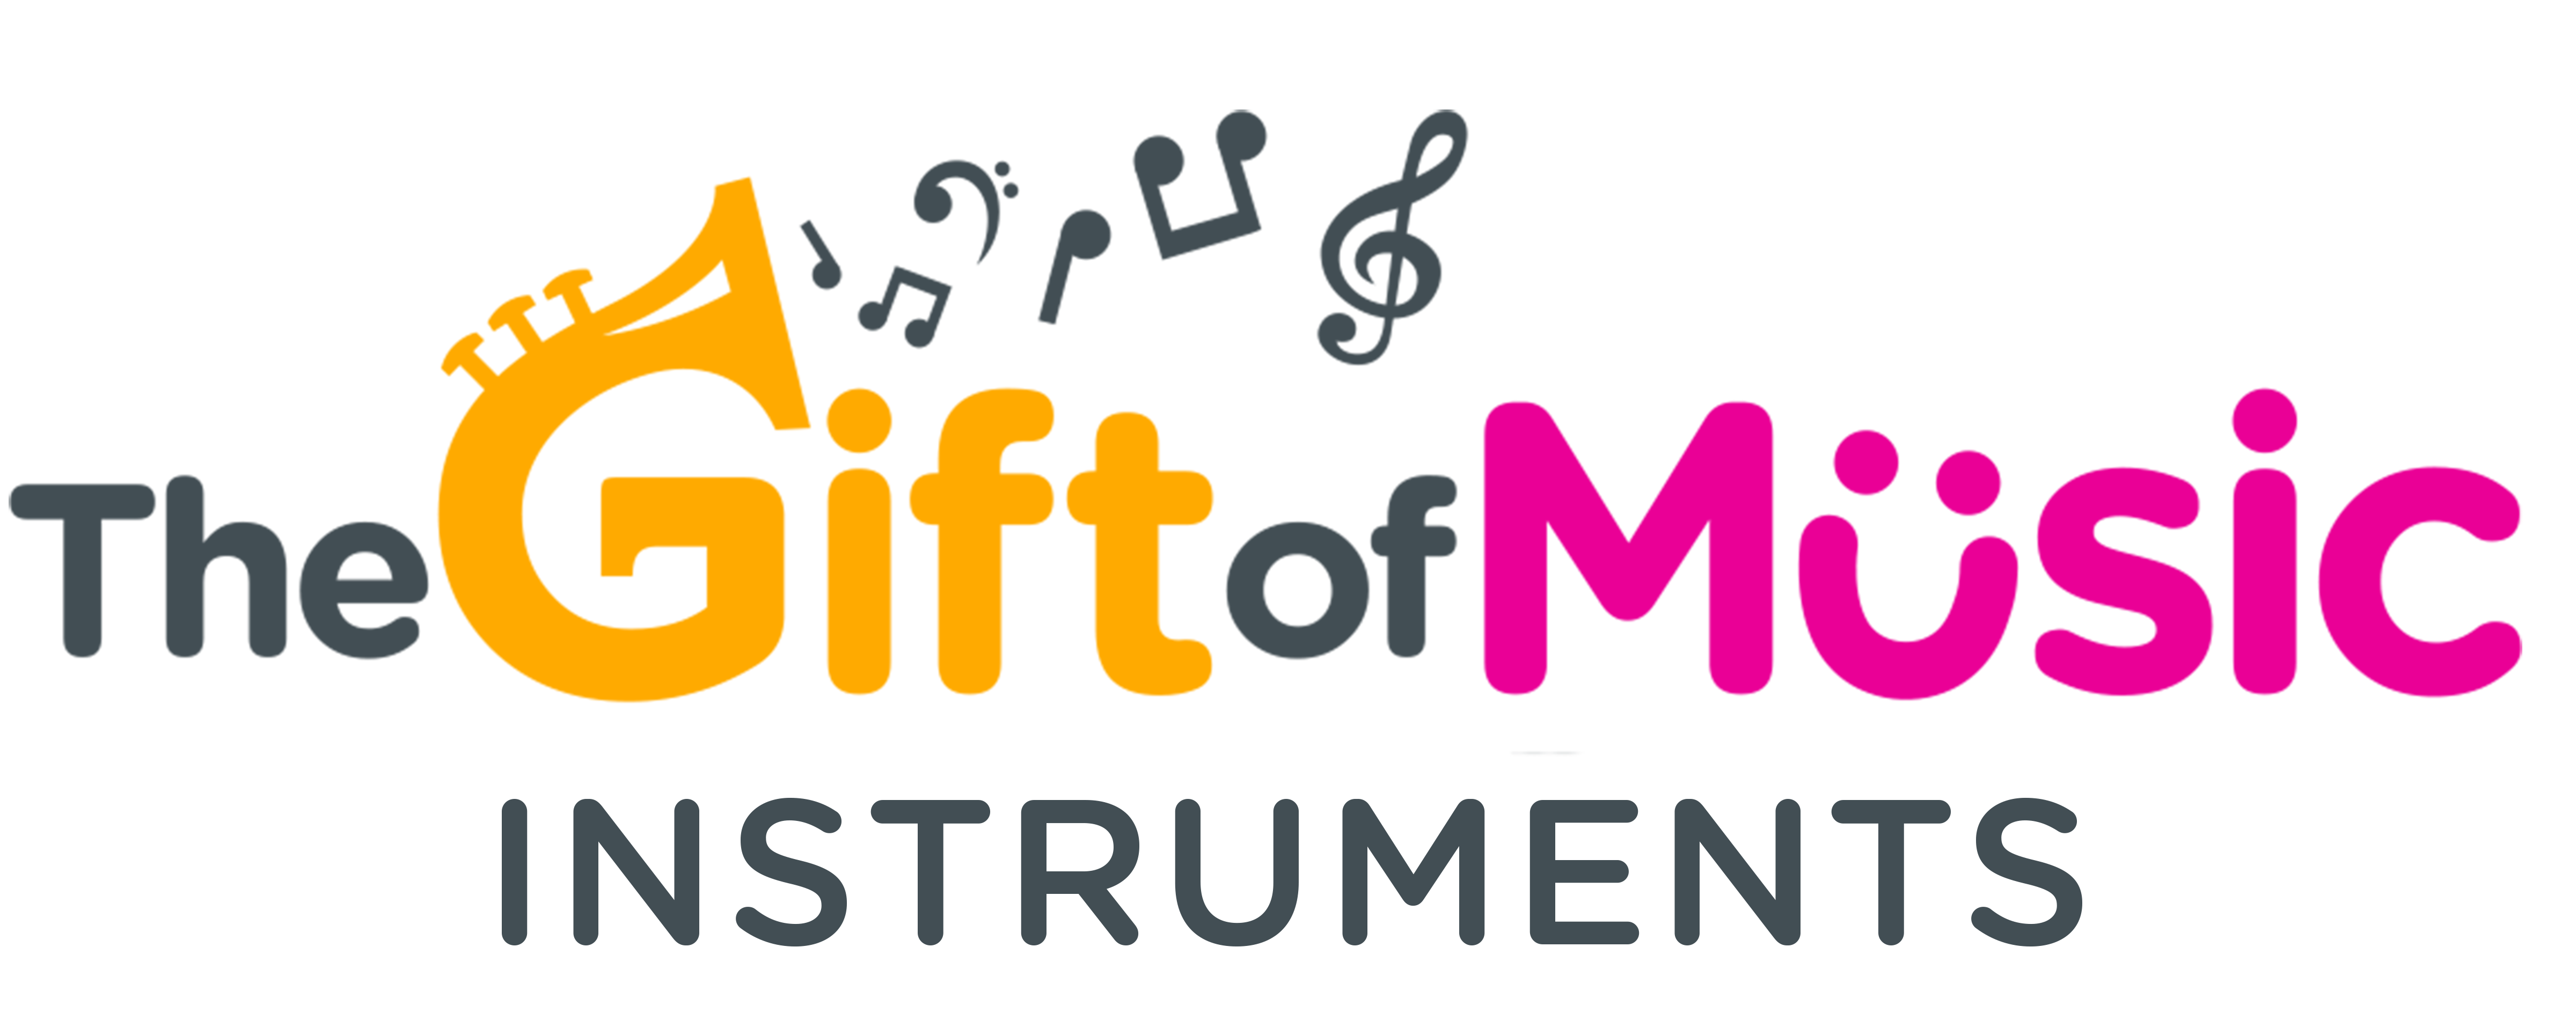 Gift of Music Instruments